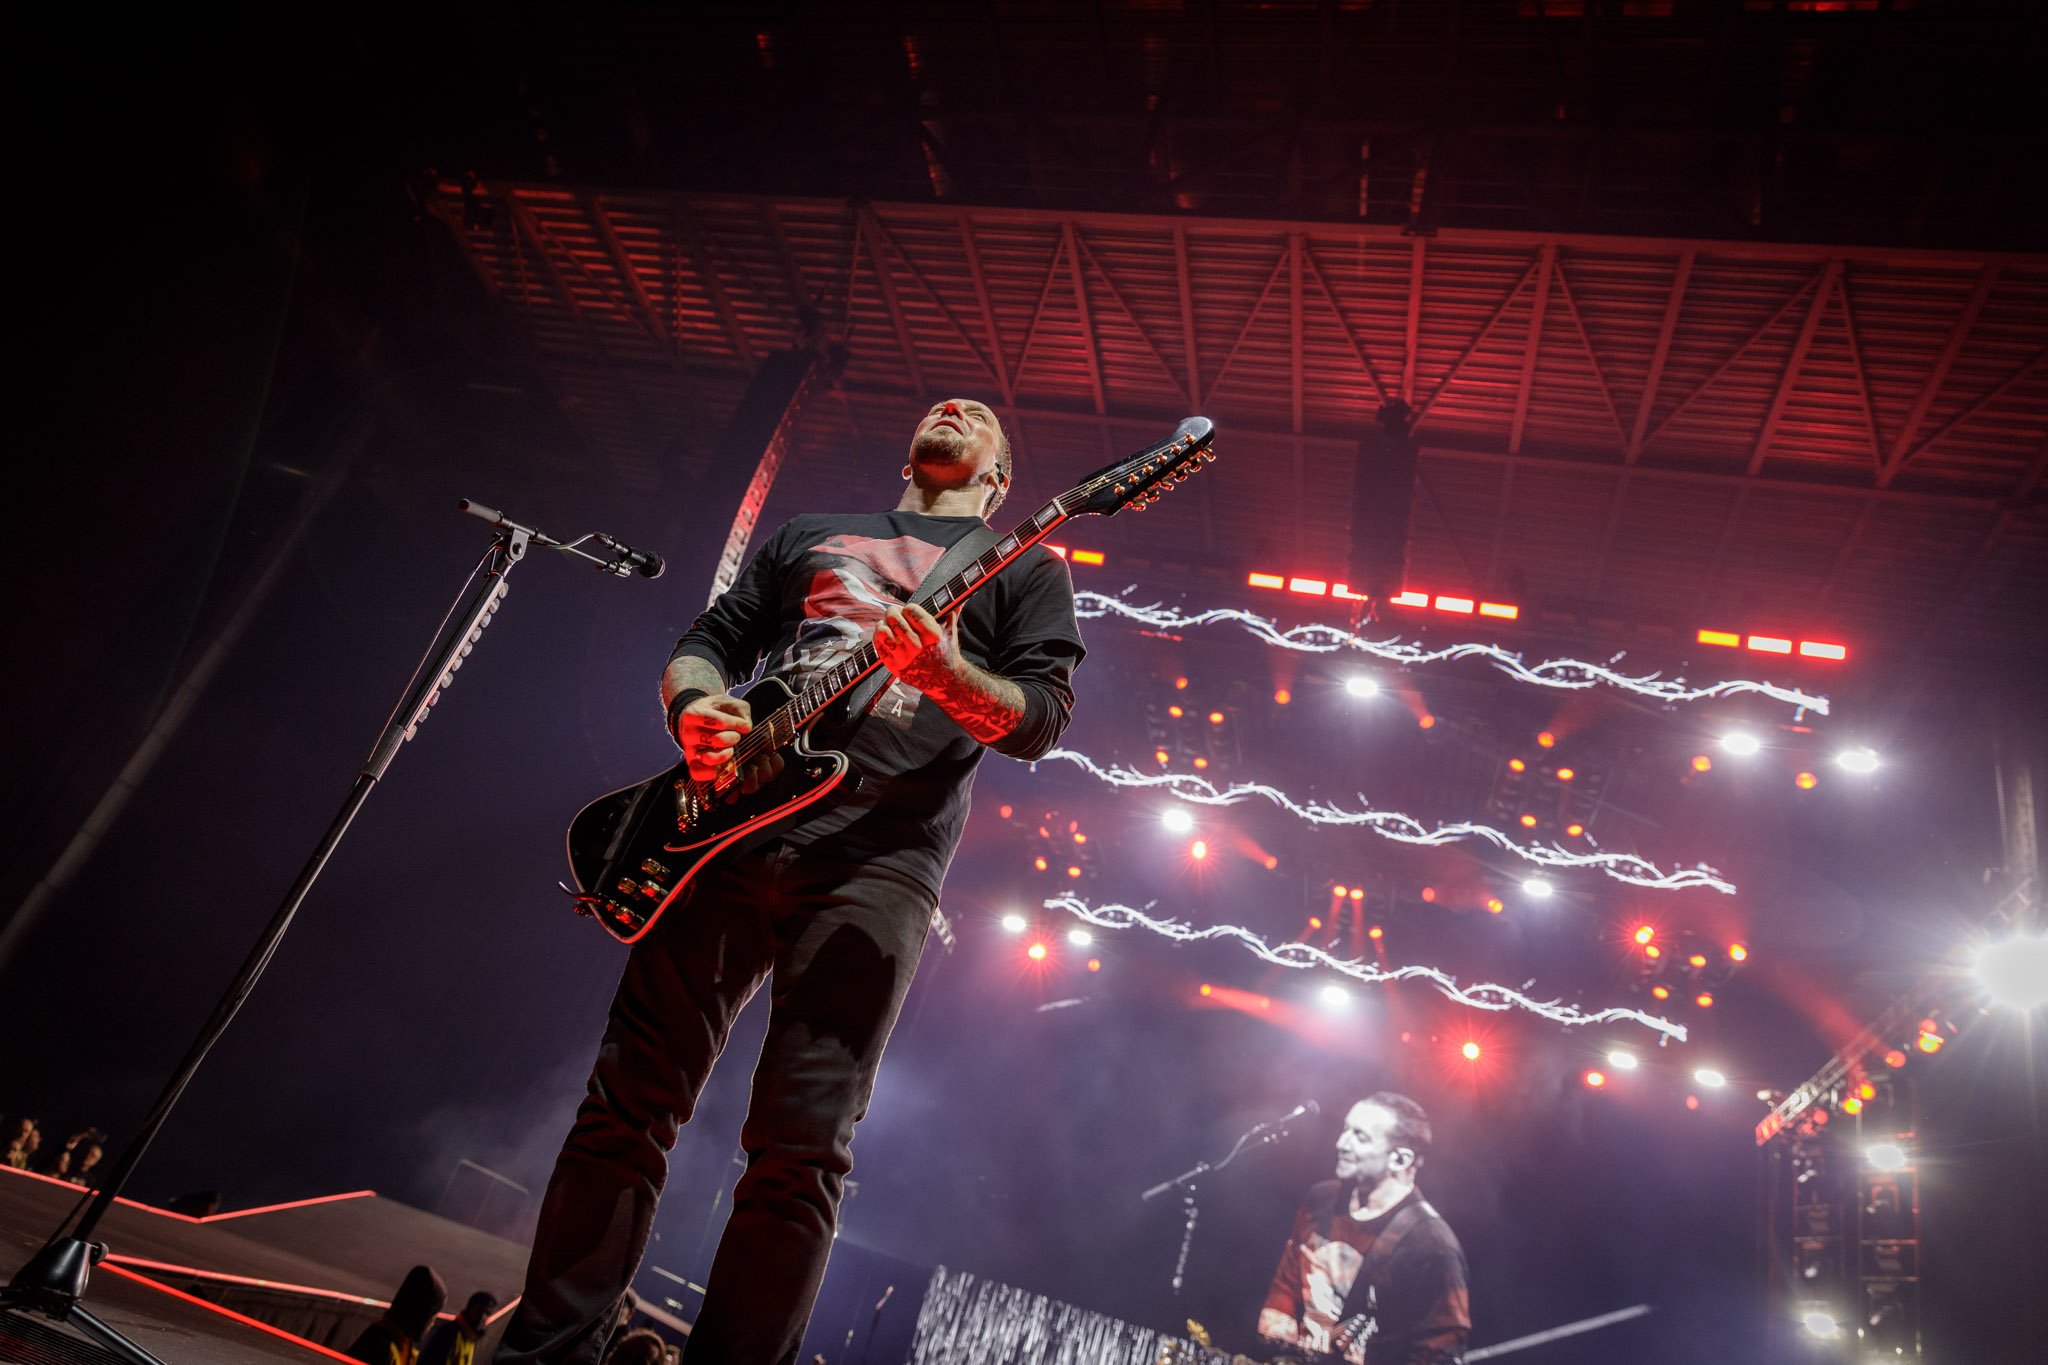 Volbeat at the First Direct Arena in Leeds on December 16th 2022